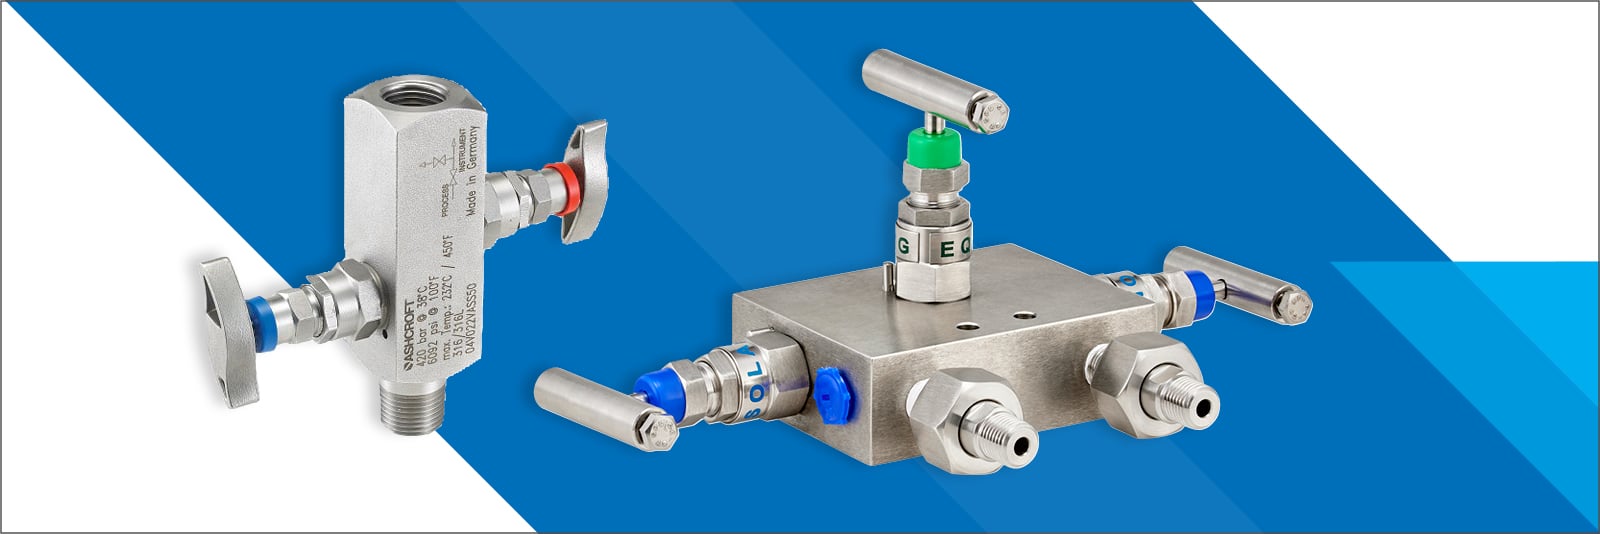 Selecting the Right Manifold Valves for Your Pressure Gauge